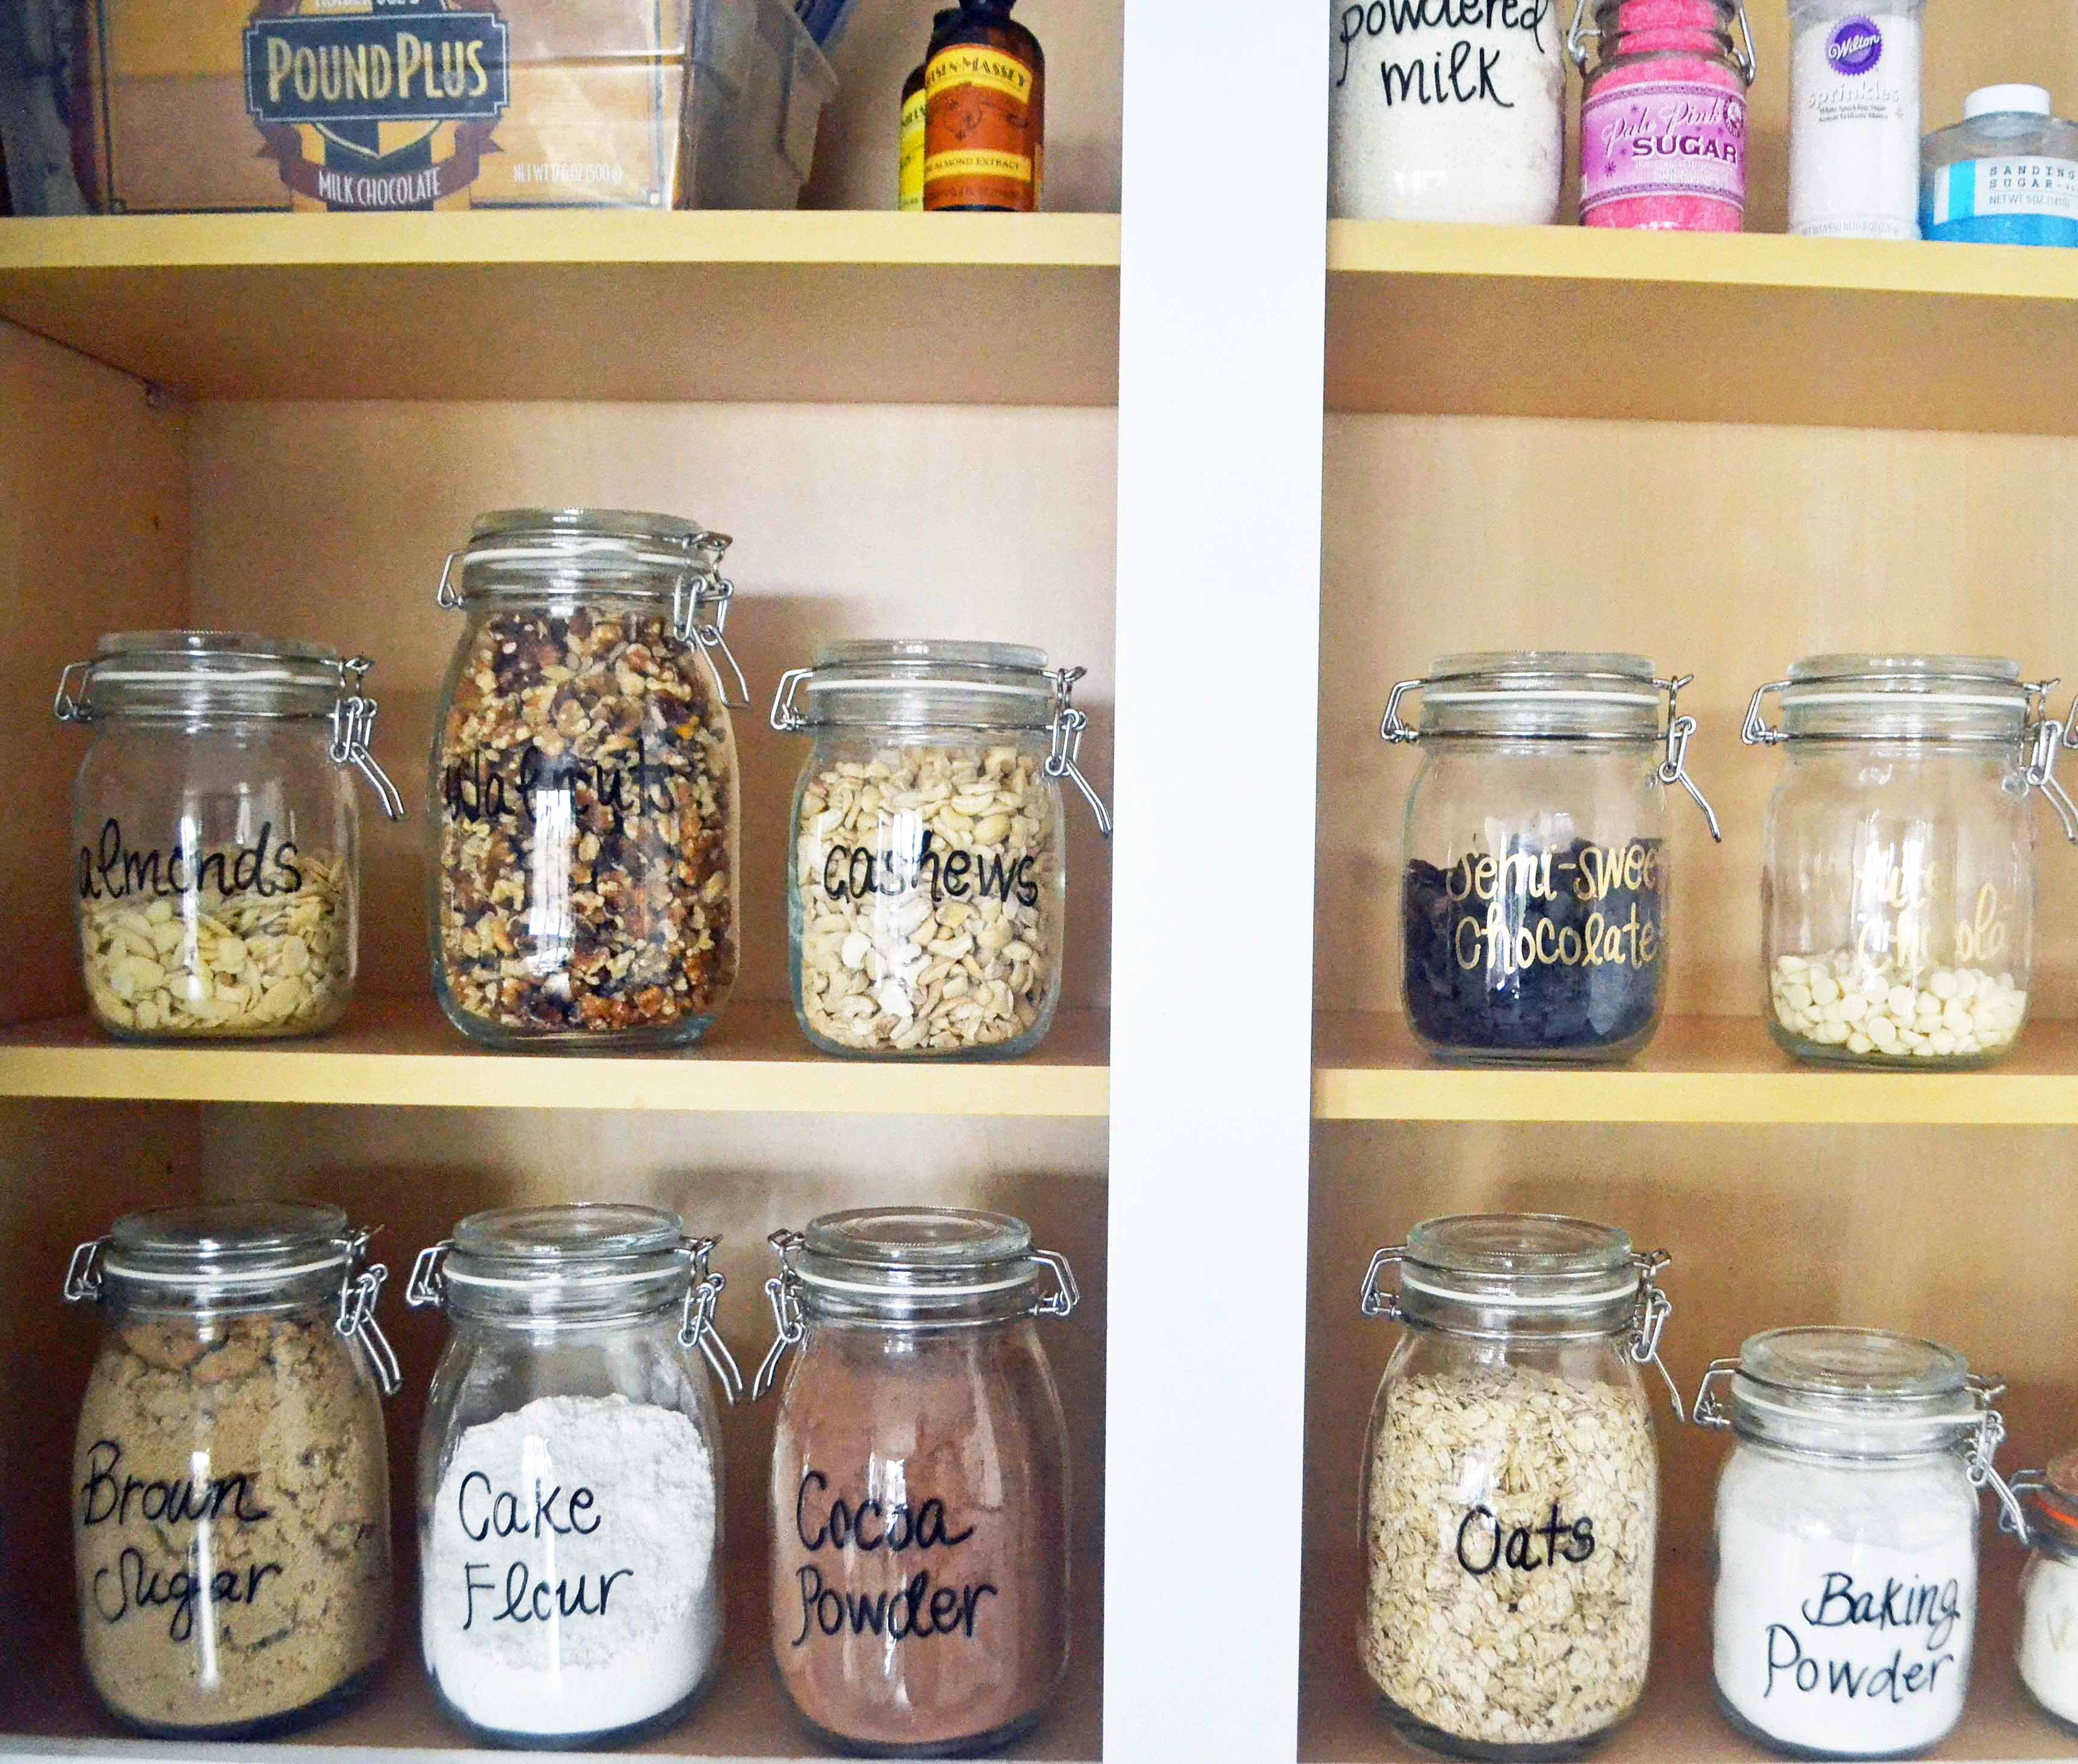 At Home: Organized Baking Ingredients - Simply Organized